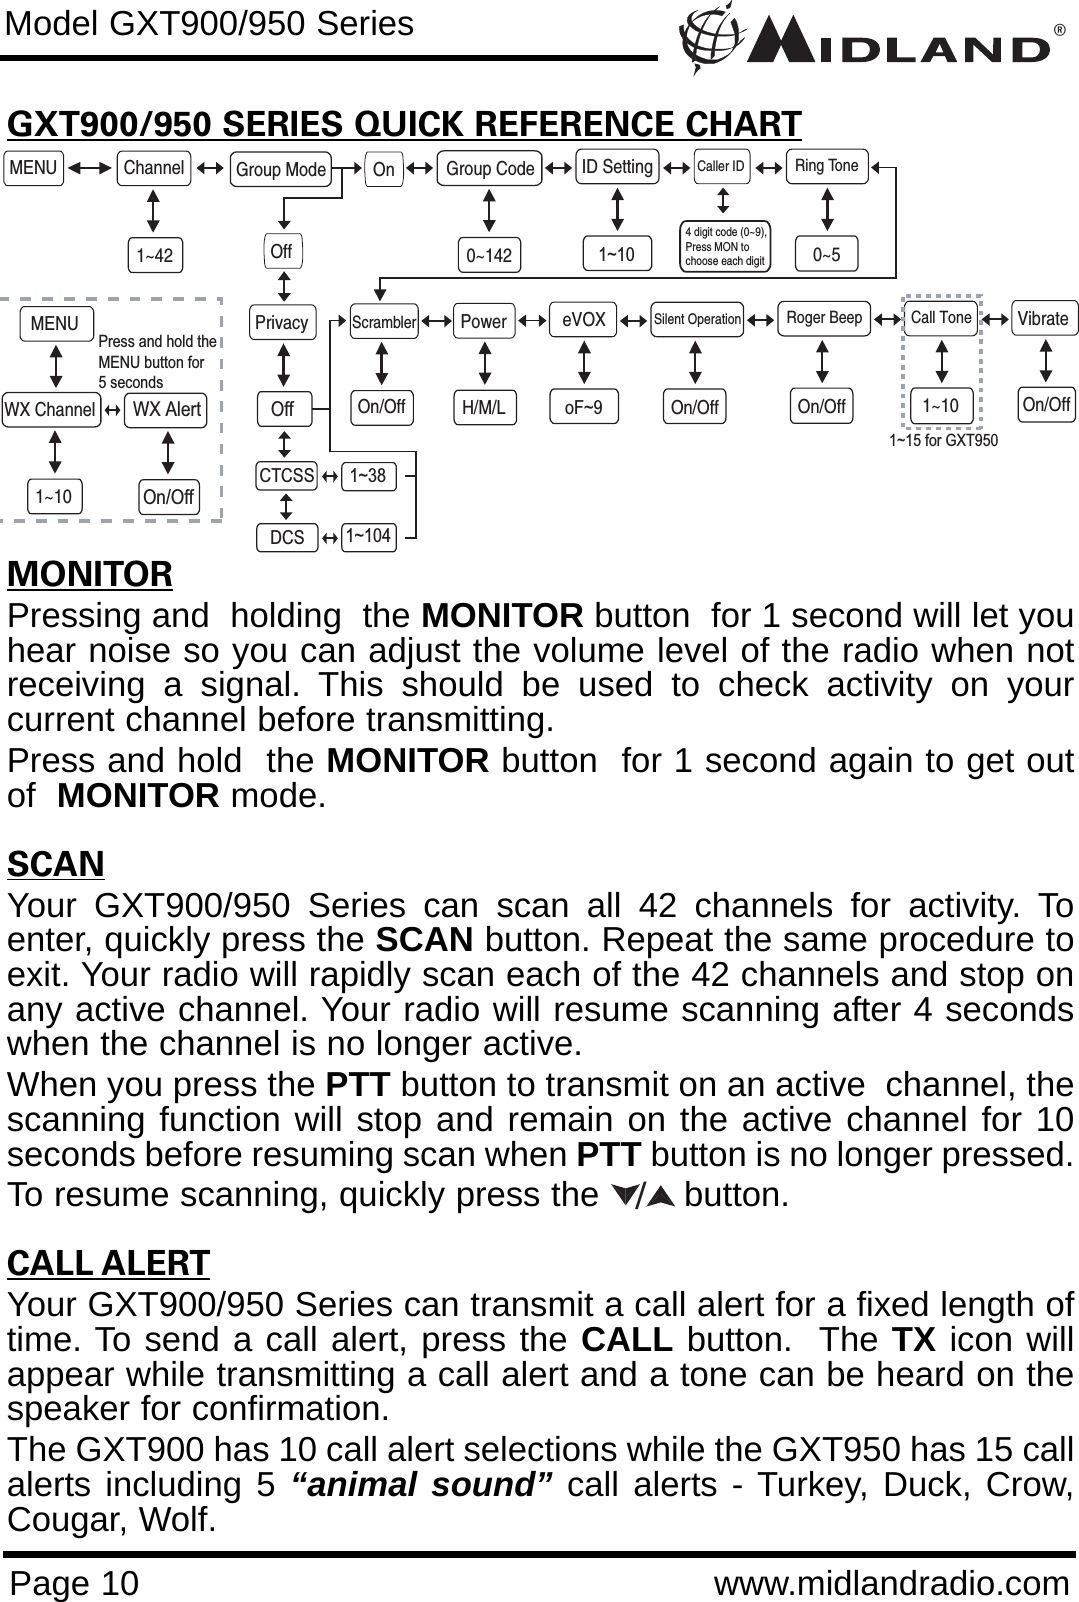 ®Page 10 www.midlandradio.comGXT900/950 SERIES QUICK REFERENCE CHARTMONITORPressing and  holding  the MONITOR button  for 1 second will let youhear noise so you can adjust the volume level of the radio when notreceiving a signal. This should be used to check activity on yourcurrent channel before transmitting. Press and hold  the MONITOR button  for 1 second again to get outof  MONITOR mode.SCANYour GXT900/950 Series can scan all 42 channels for activity. Toenter, quickly press the SCAN button. Repeat the same procedure toexit. Your radio will rapidly scan each of the 42 channels and stop onany active channel. Your radio will resume scanning after 4 secondswhen the channel is no longer active.When you press the PTT button to transmit on an active  channel, thescanning function will stop and remain on the active channel for 10seconds before resuming scan when PTT button is no longer pressed. To resume scanning, quickly press the  button.CALL ALERTYour GXT900/950 Series can transmit a call alert for a fixed length oftime. To send a call alert, press the CALL button.  The TX icon willappear while transmitting a call alert and a tone can be heard on thespeaker for confirmation. The GXT900 has 10 call alert selections while the GXT950 has 15 callalerts including 5 “animal sound” call alerts - Turkey, Duck, Crow,Cougar, Wolf.Model GXT900/950 SeriesMENU ChanneleVOX1~42PrivacyRoger BeepOn/OffScrambler Call Tone1~10VibrateOn/OffWX Channel1~10Silent OperationOn/OffoF~9OffCTCSSDCS1~381~104WX AlertOn/OffGroup Mode OnOffID Setting Ring Tone0~5Group Code0~142Caller ID4 digit code (0~9), Press MON to choose each digit1~101~15 for GXT950PowerH/M/LOn/OffMENUPress and hold theMENU button for 5 seconds/